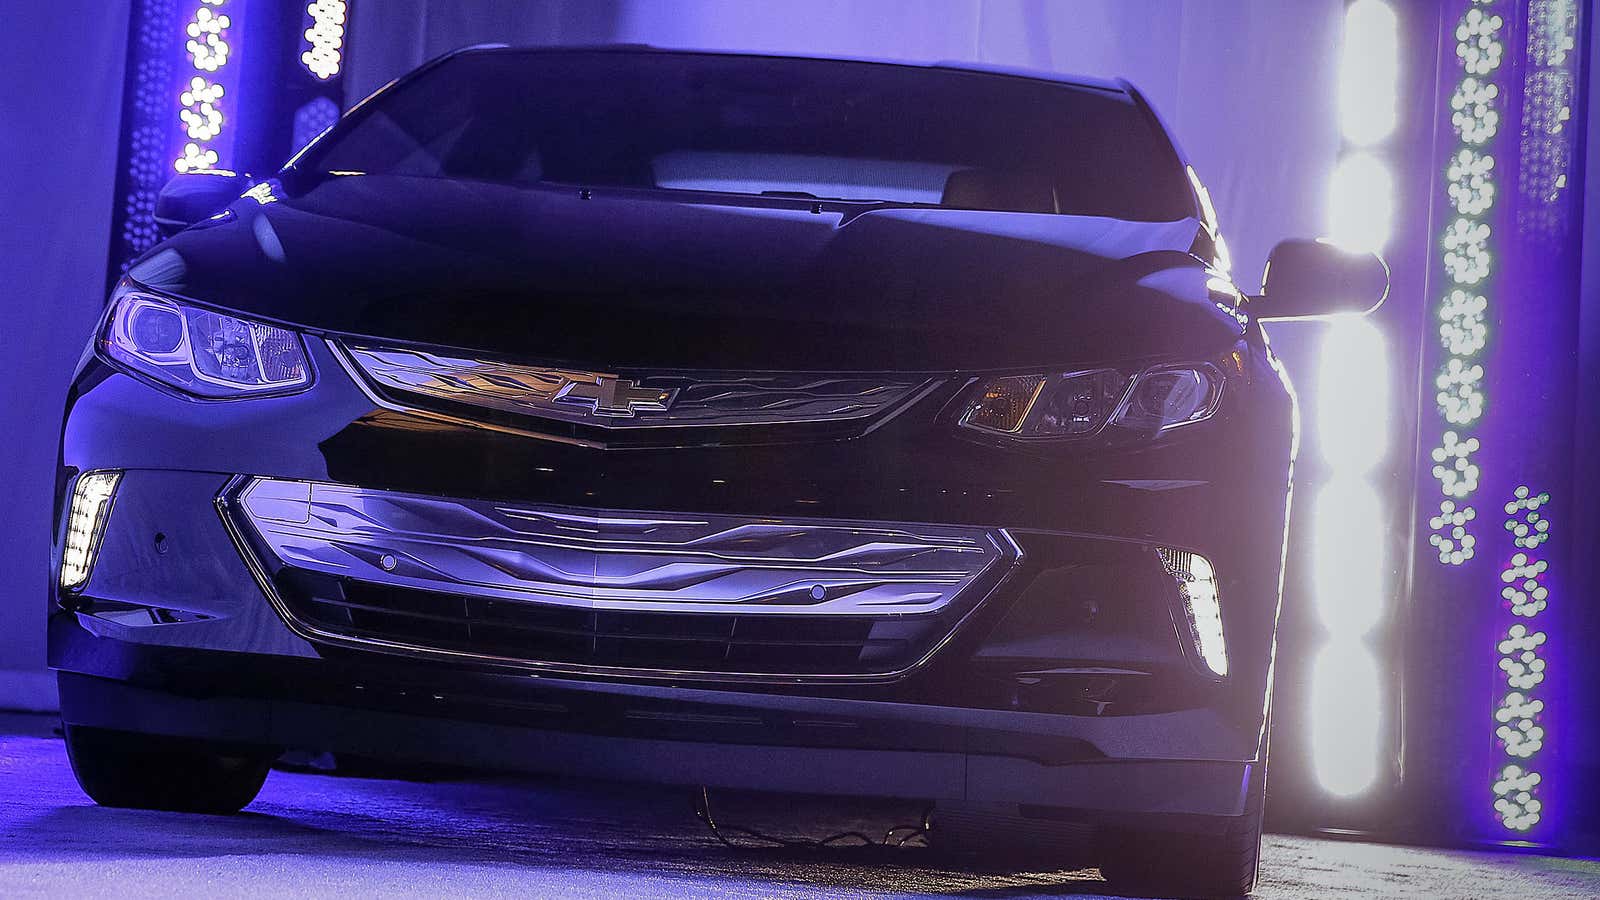 The plug-in 2016 Volt will also be unveiled Monday.